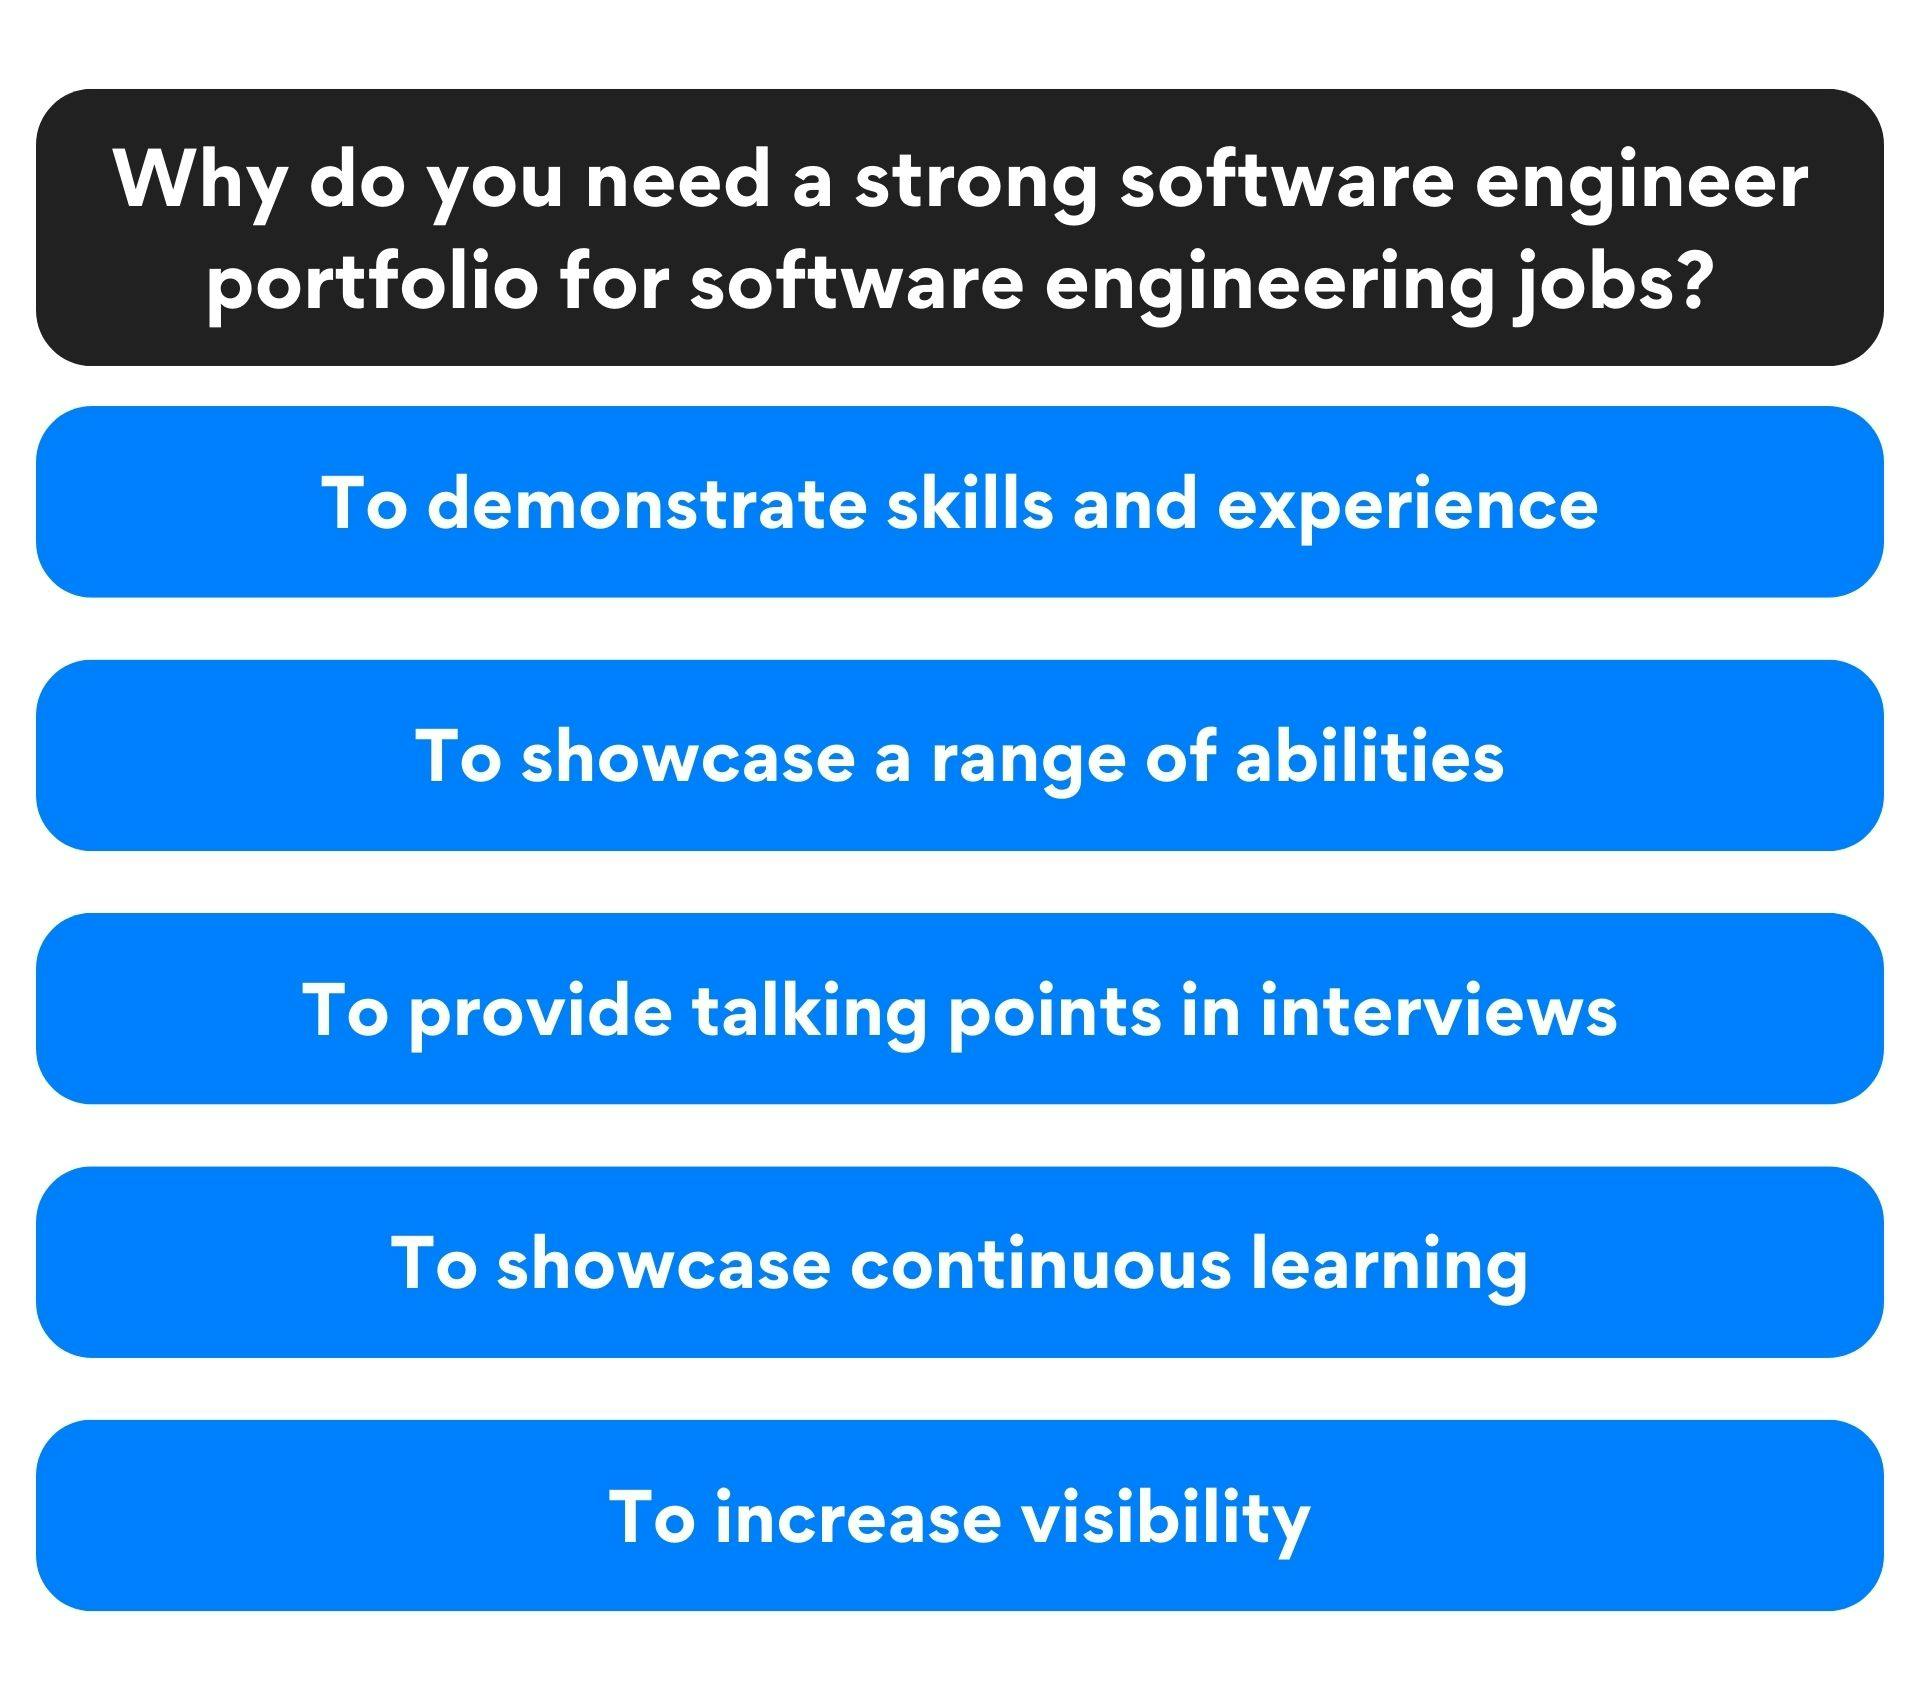 Why do you need a strong software engineering portfolio for software engineering jobs